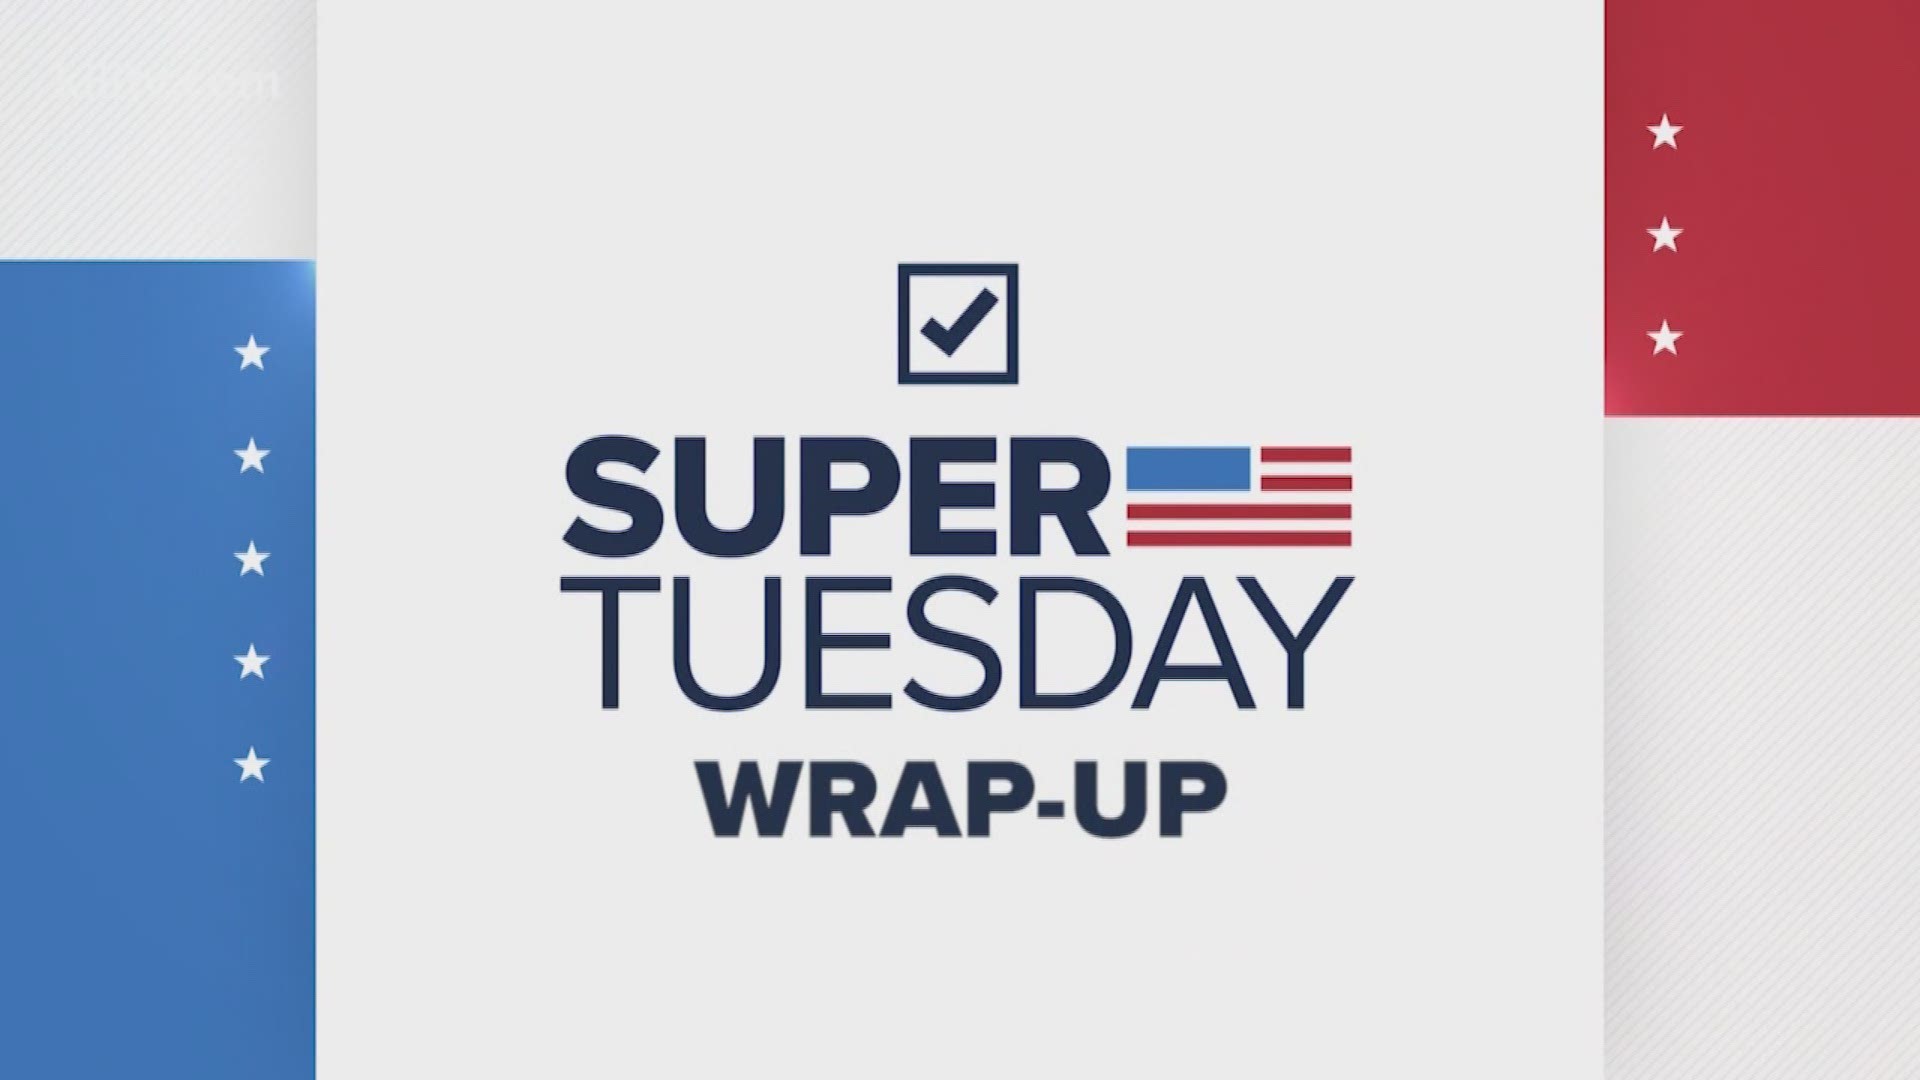 Quite a few candidates were unopposed this Super Tuesday, but a few were in a hard fought battle to win their party's nomination.